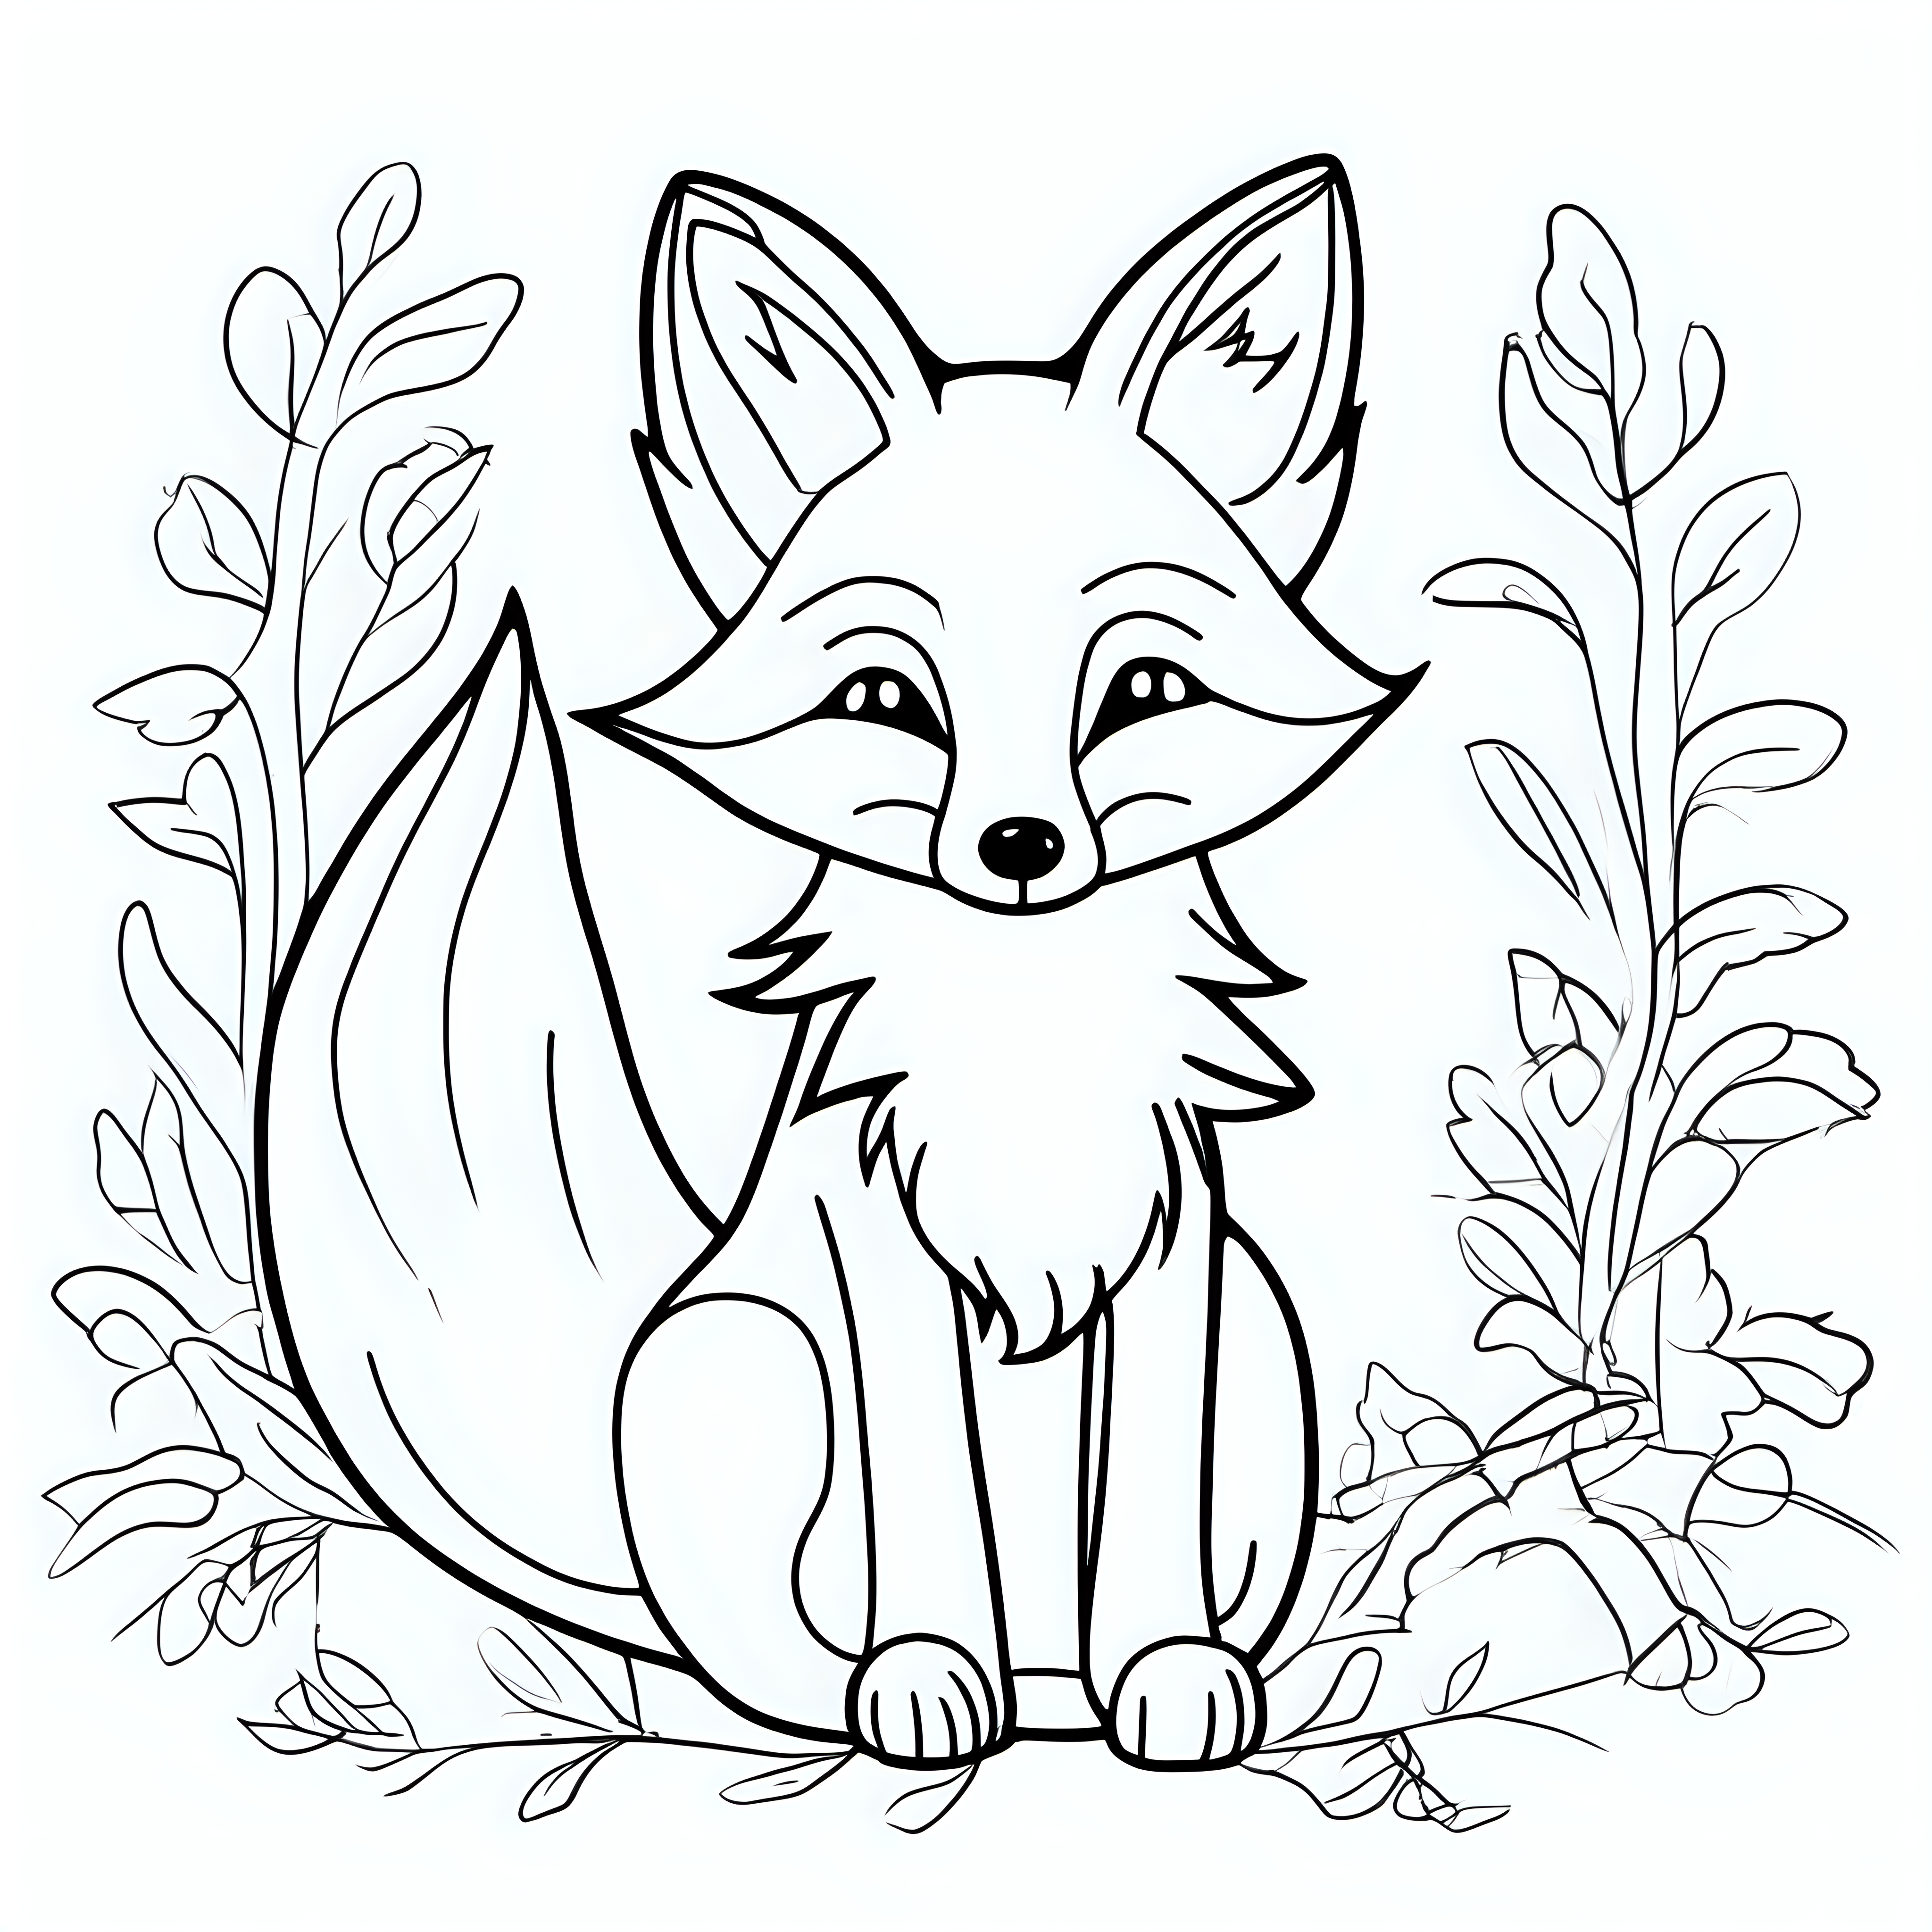 draw a cute fox with only the outline in back for a coloring book